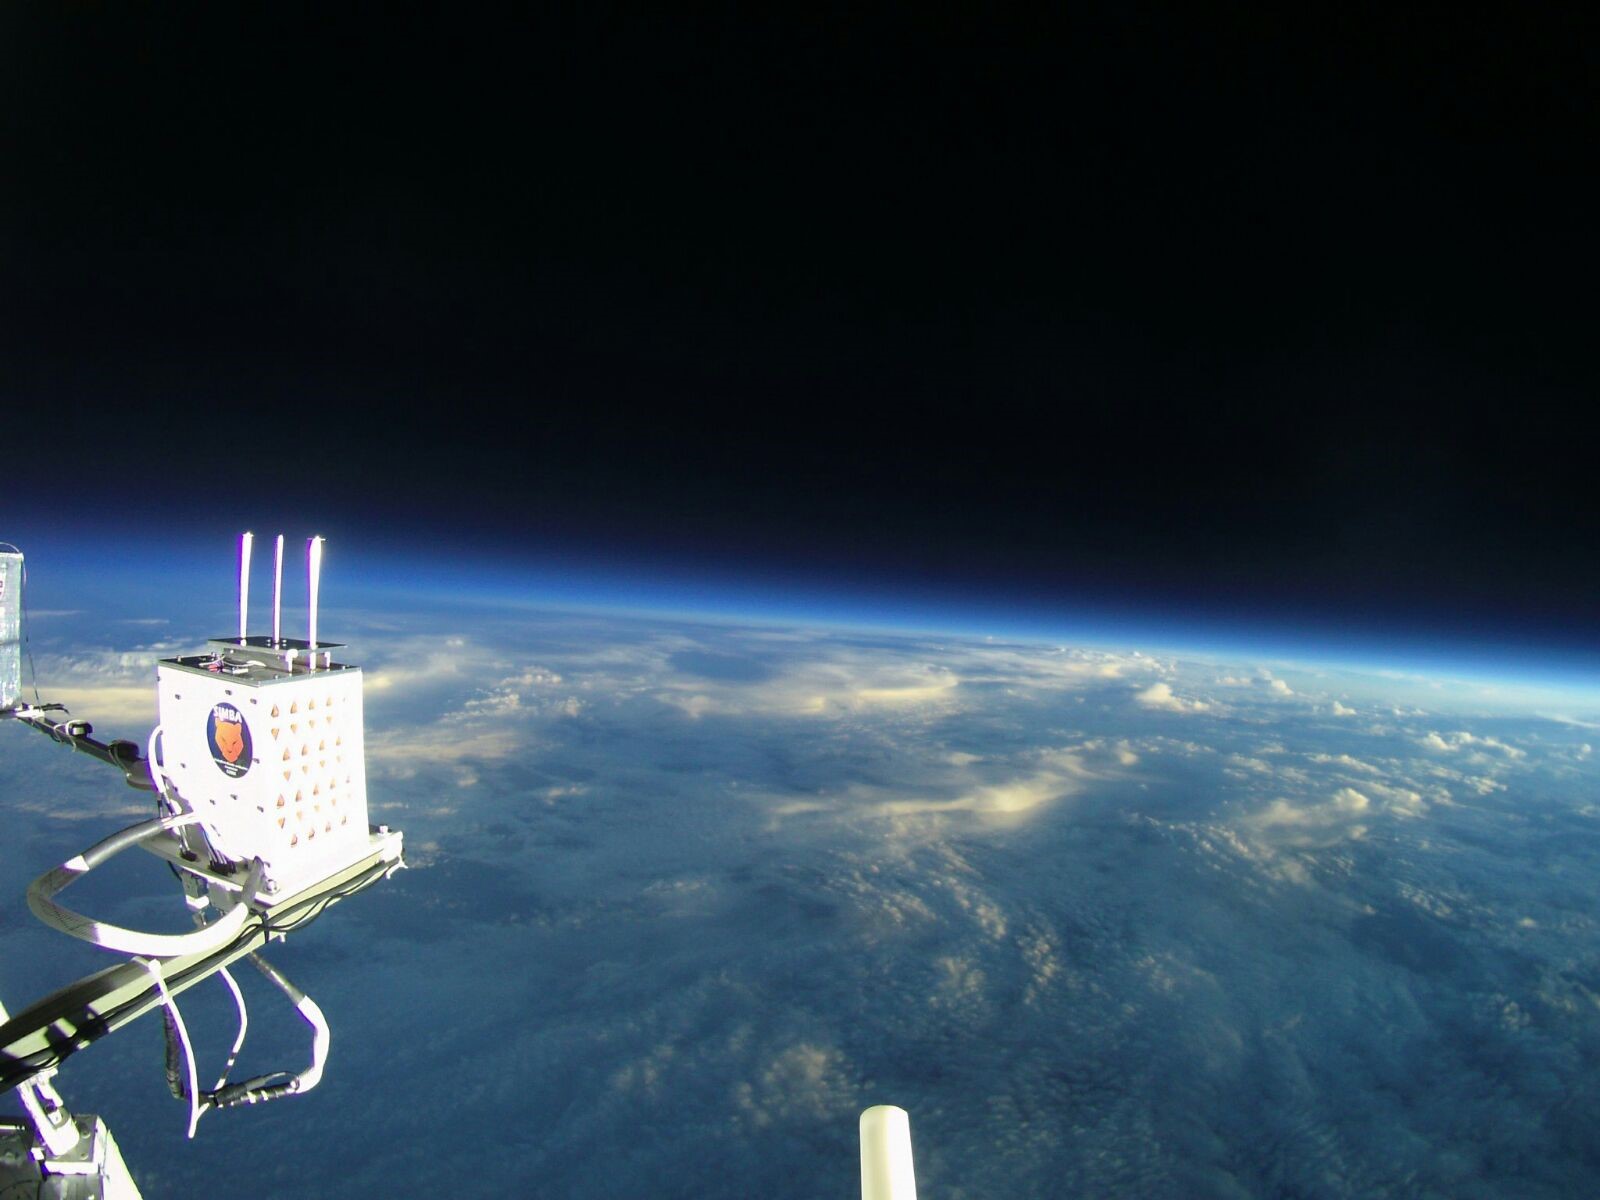 Photo credit: HASP/LSU/NASA) A past balloon's view from the stratosphere.